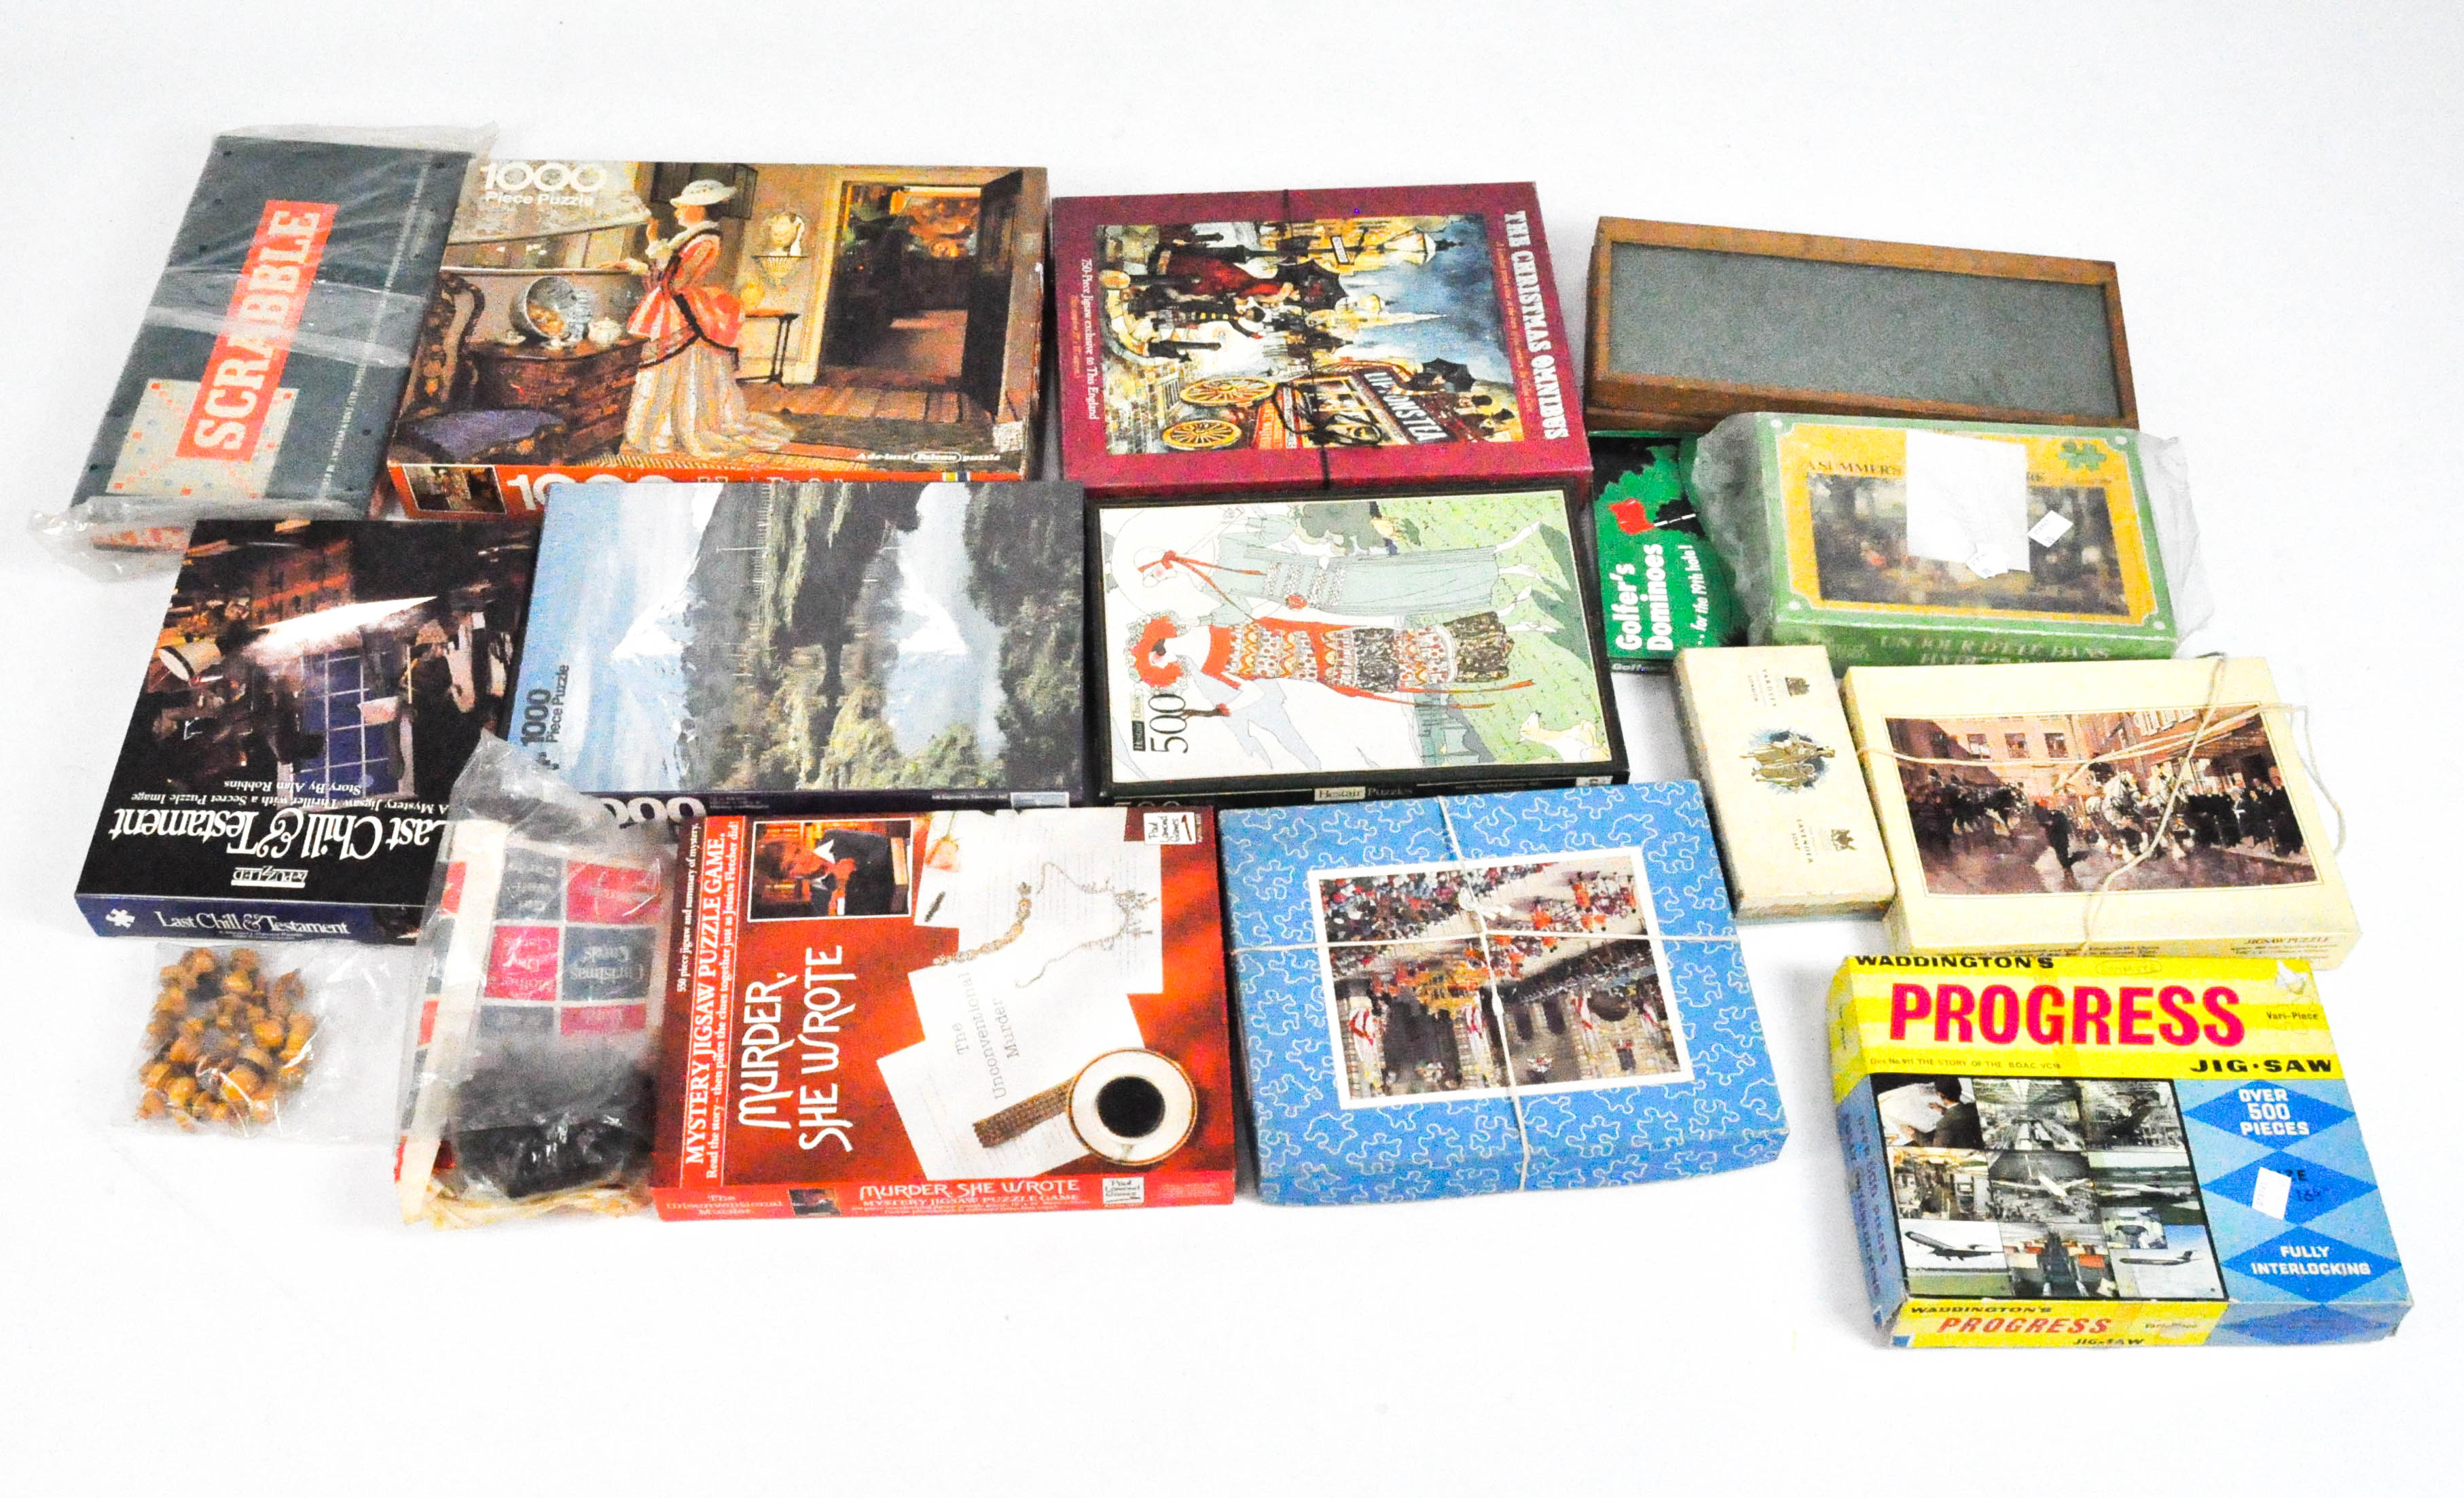 A collection of vintage games and puzzles, including Scrabble and jigsaw puzzles,